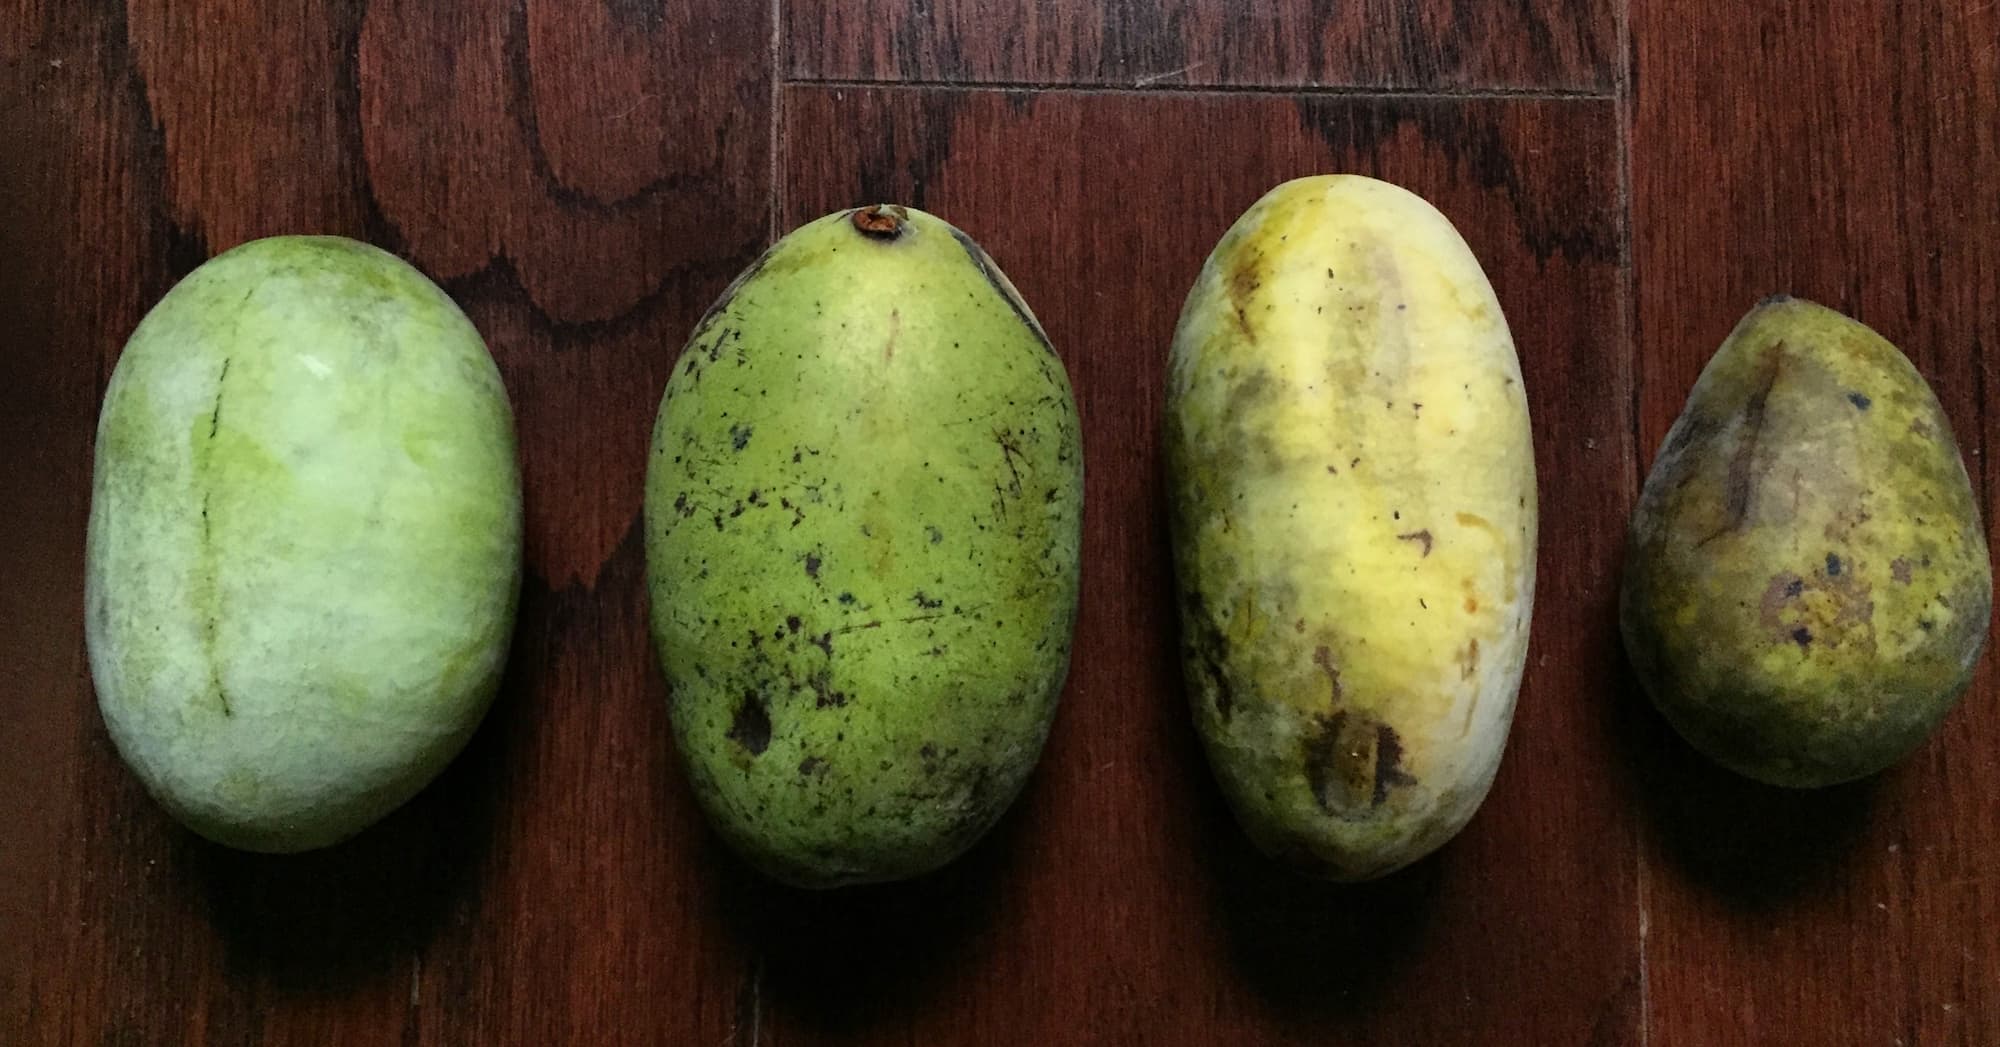 A comparison of four pawpaws from least to most ripe, left to right. The two on the right side are ready to eat.